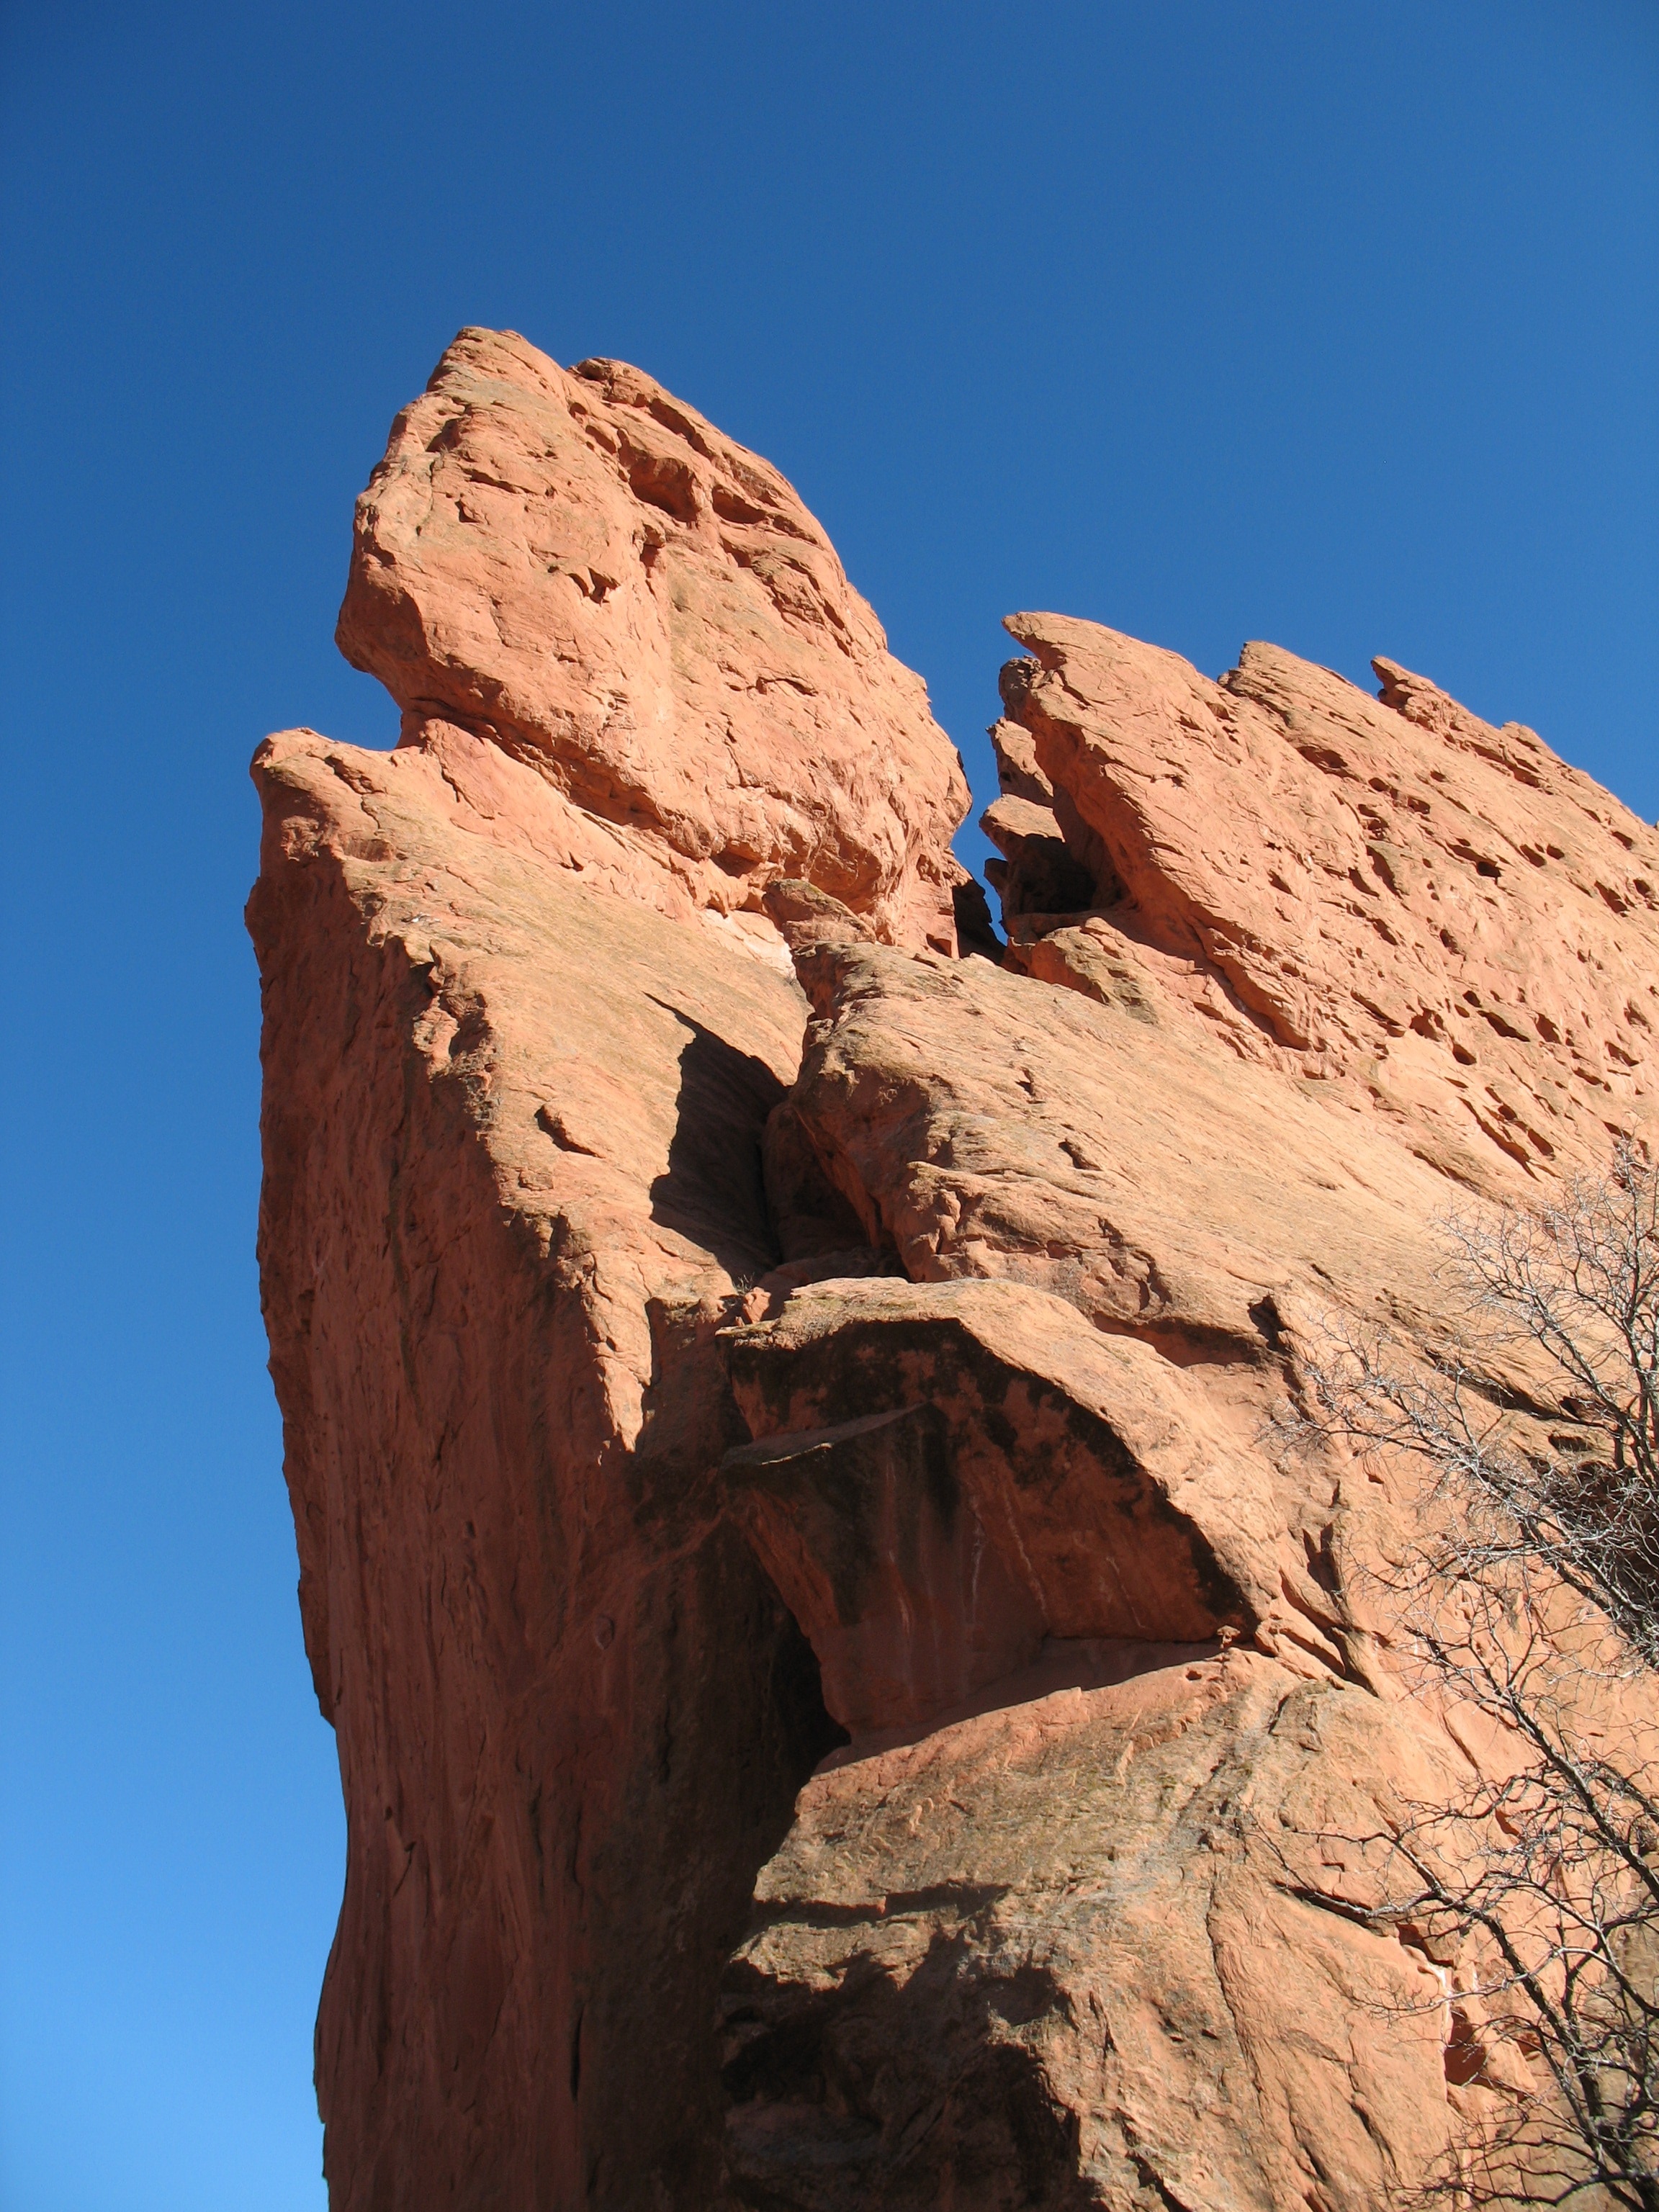 beige rock formation with gray dried branches during daytime under clear blue sky